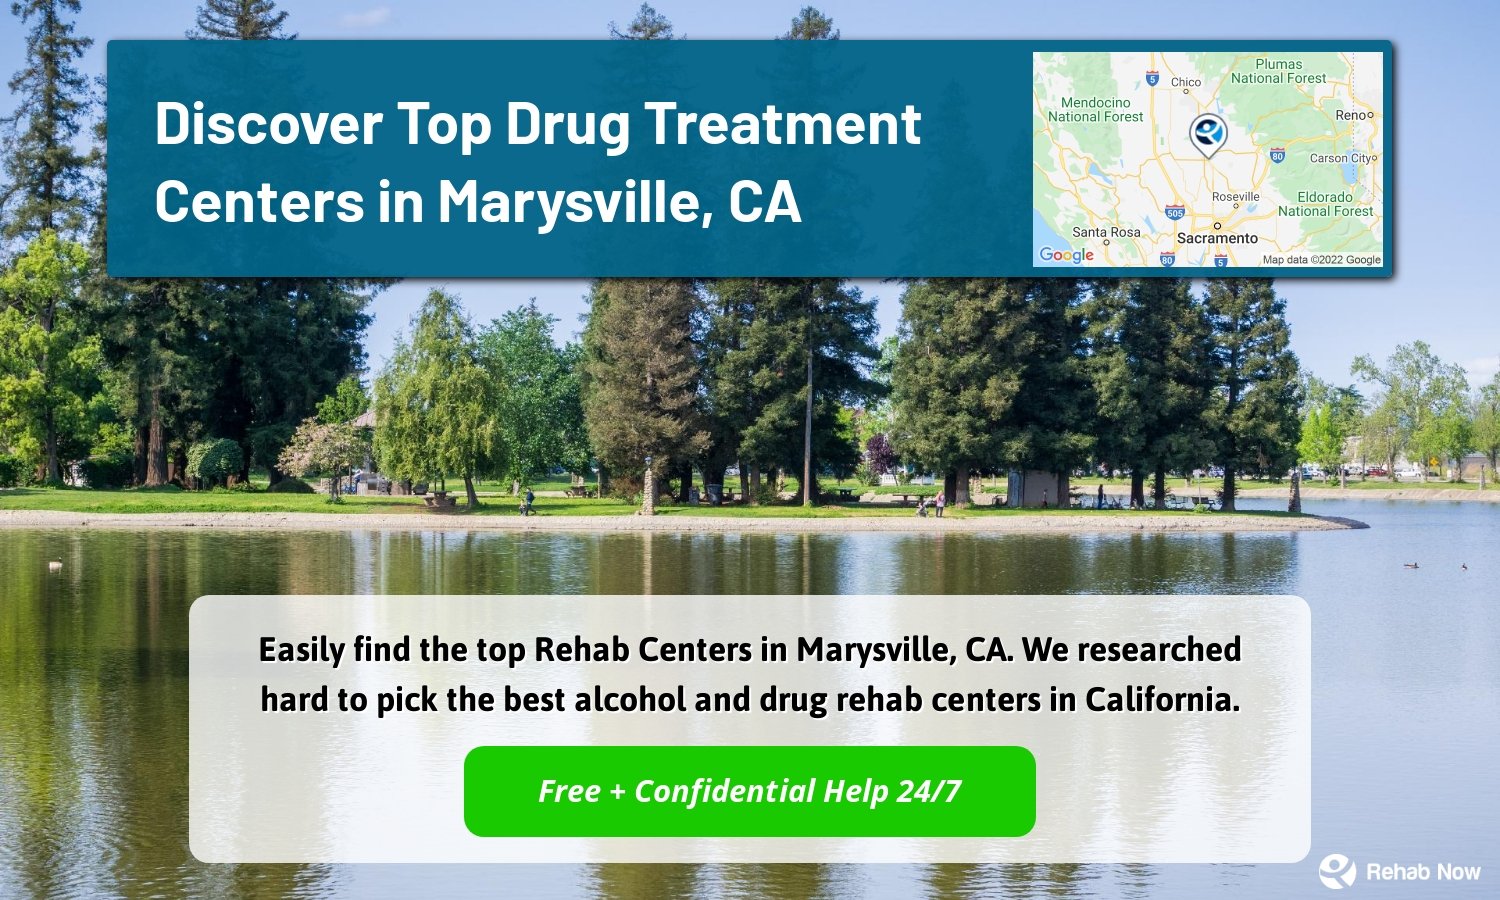 Easily find the top Rehab Centers in Marysville, CA. We researched hard to pick the best alcohol and drug rehab centers in California.